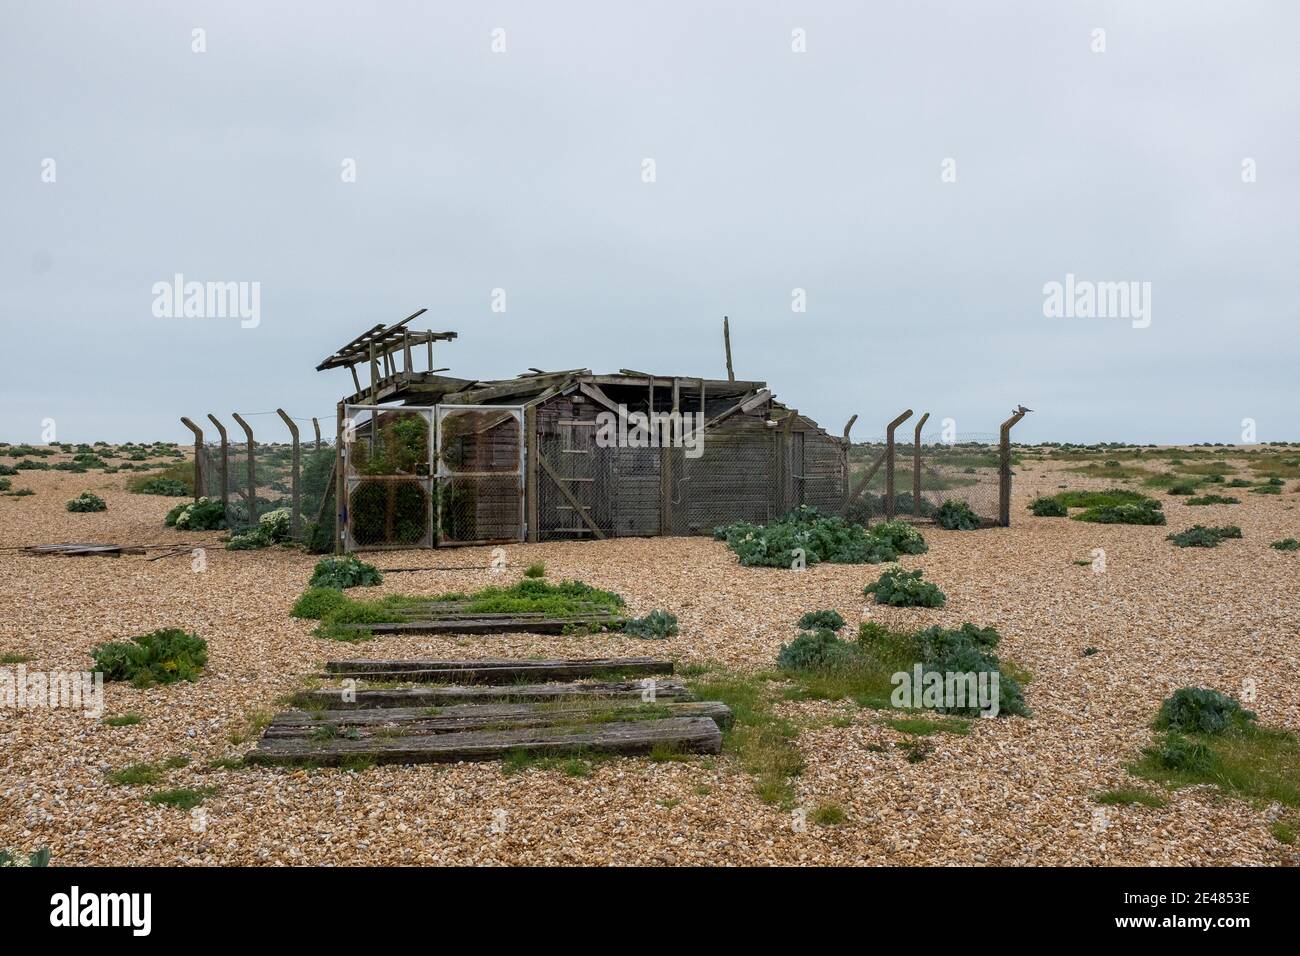 The beach at Dunheness in Kent is famous for it’s mass of pebbles and shingle, its isolation and bleakness. 09 June 2016. Photo: Neil Turner Stock Photo